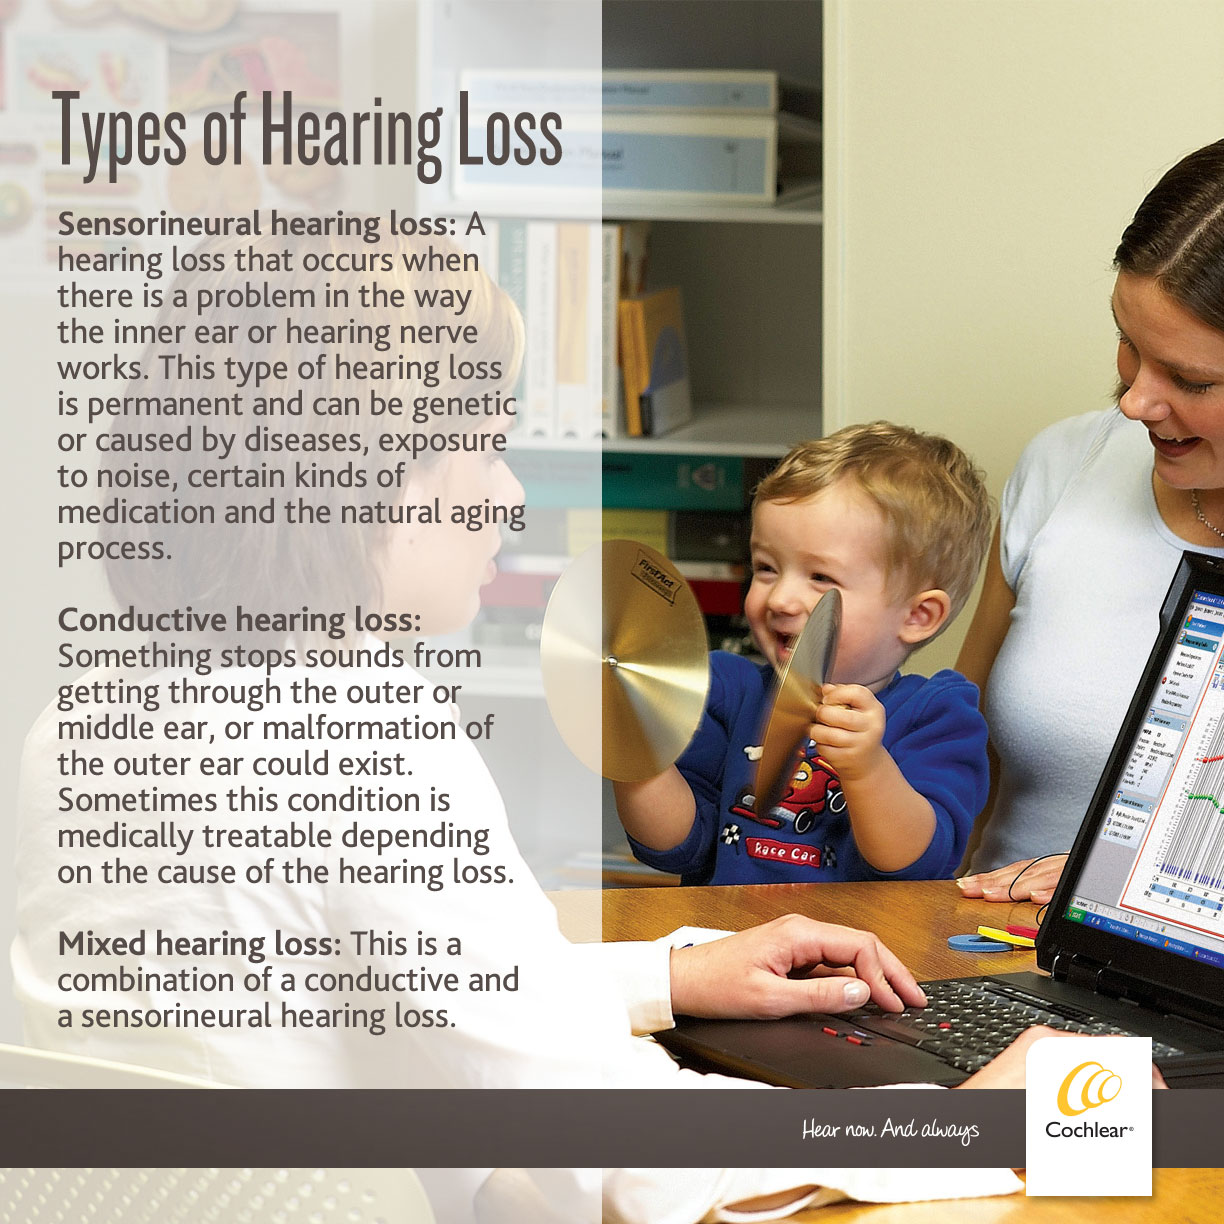 Understanding & Recognizing The Signs Of Hearing Loss In Children